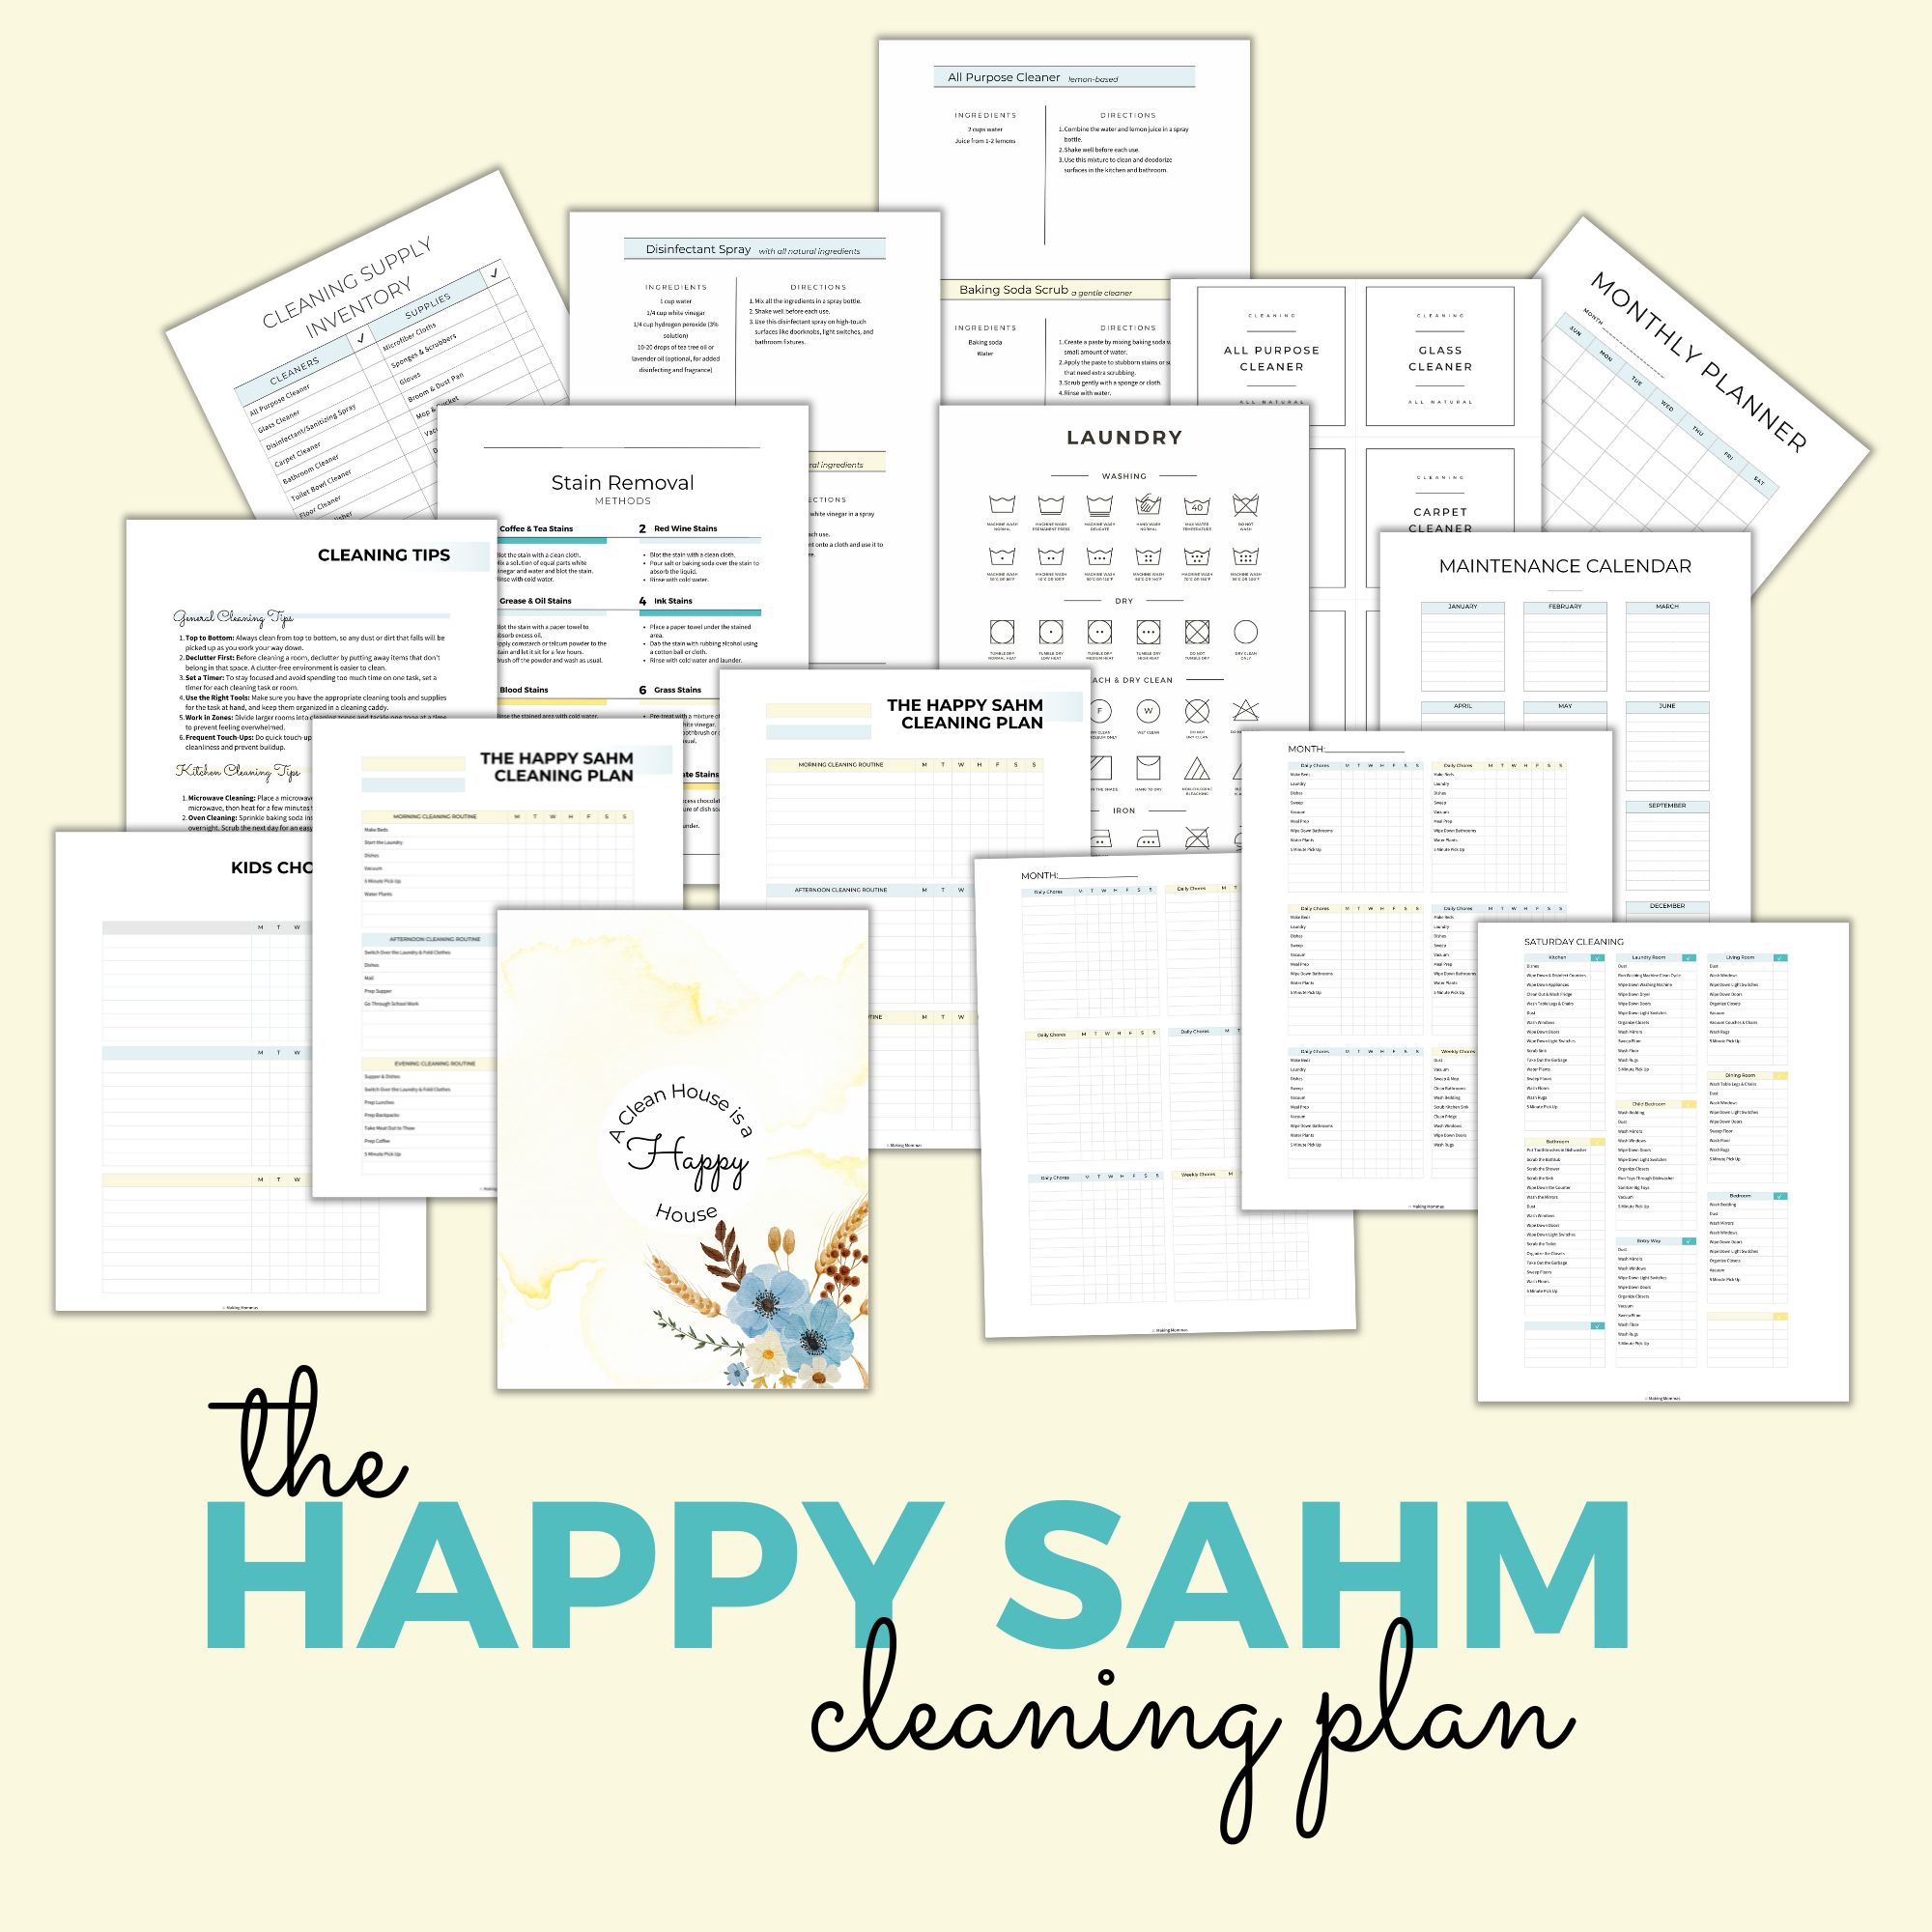 image of the happy sahm cleaning plan